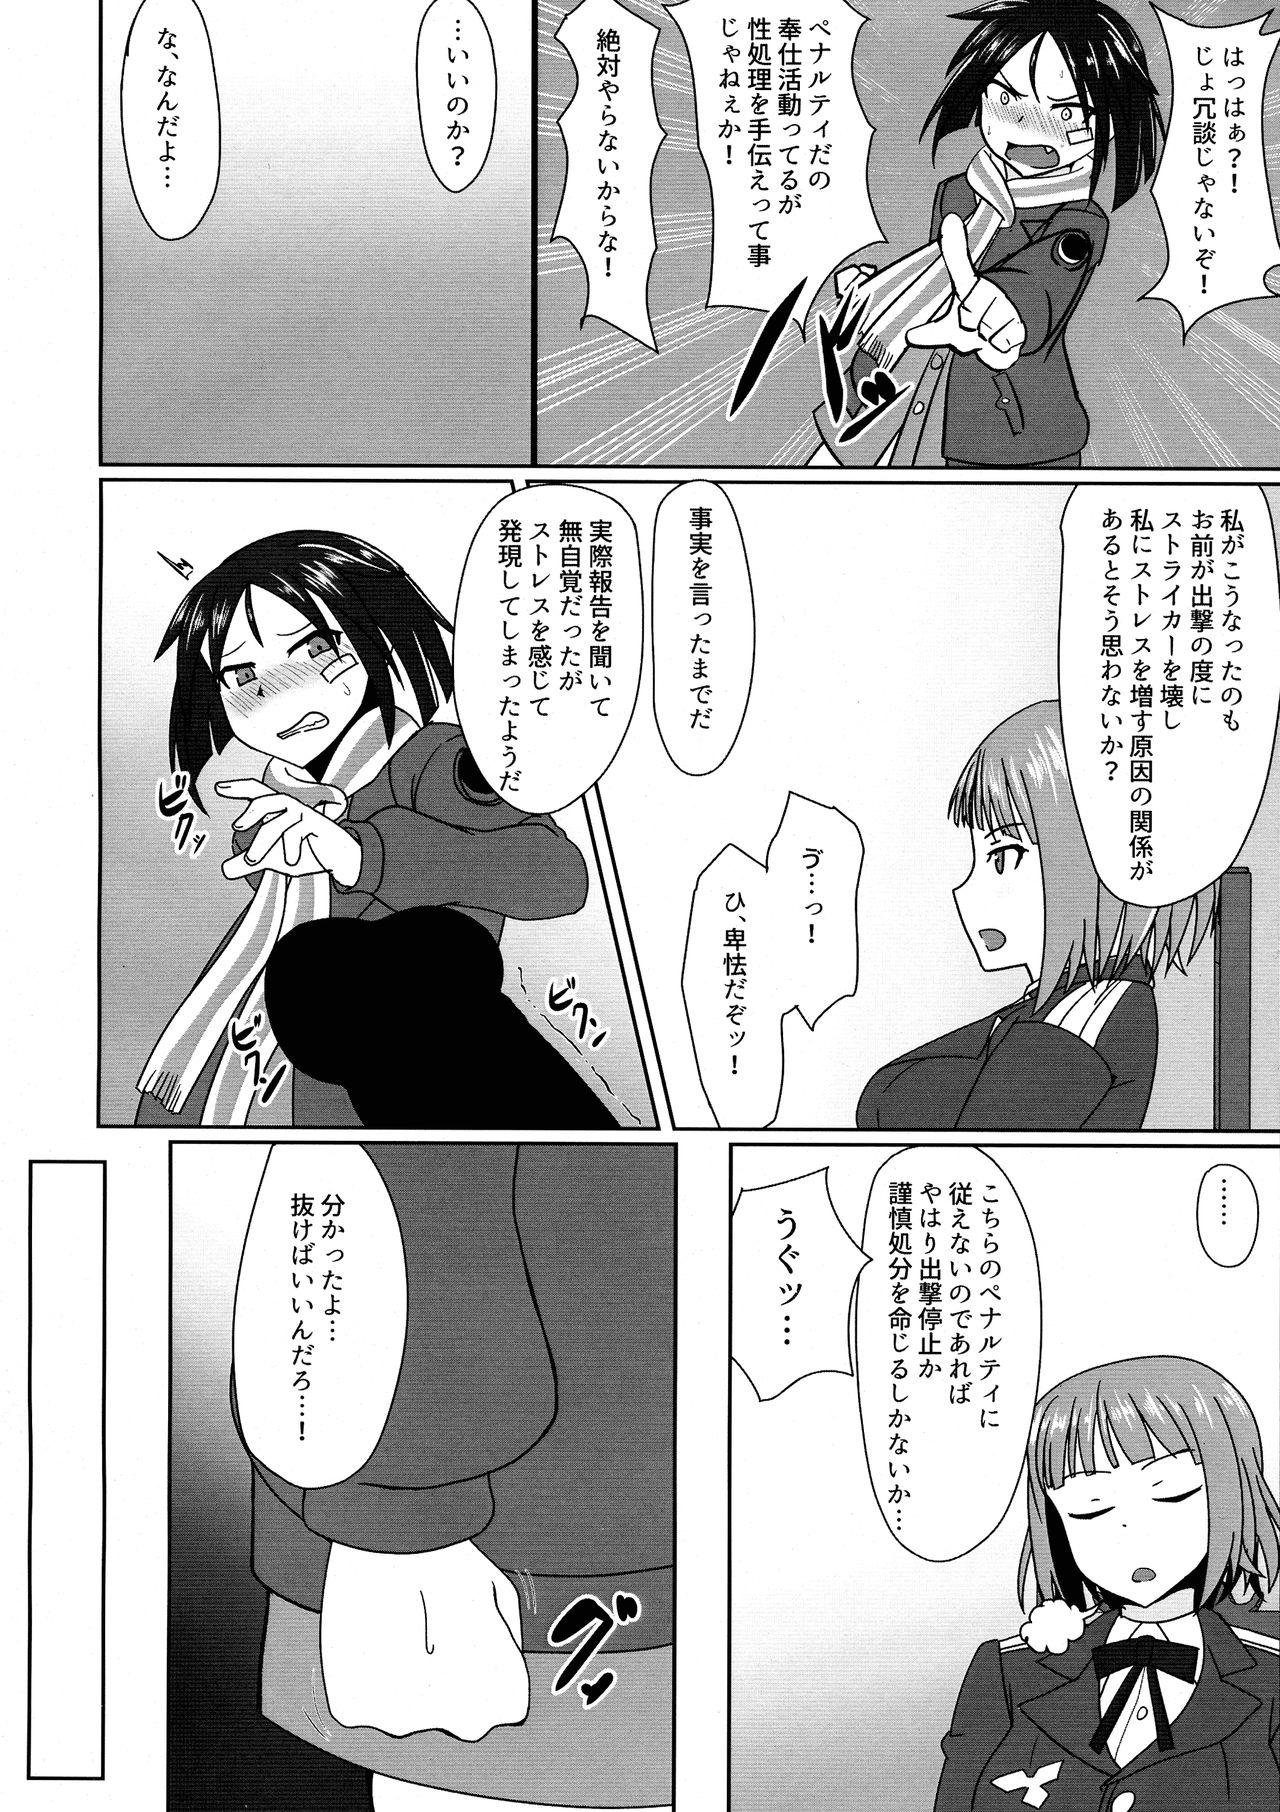 Officesex Nao-chan no Houshi Katsudou - Brave witches Deep - Page 6